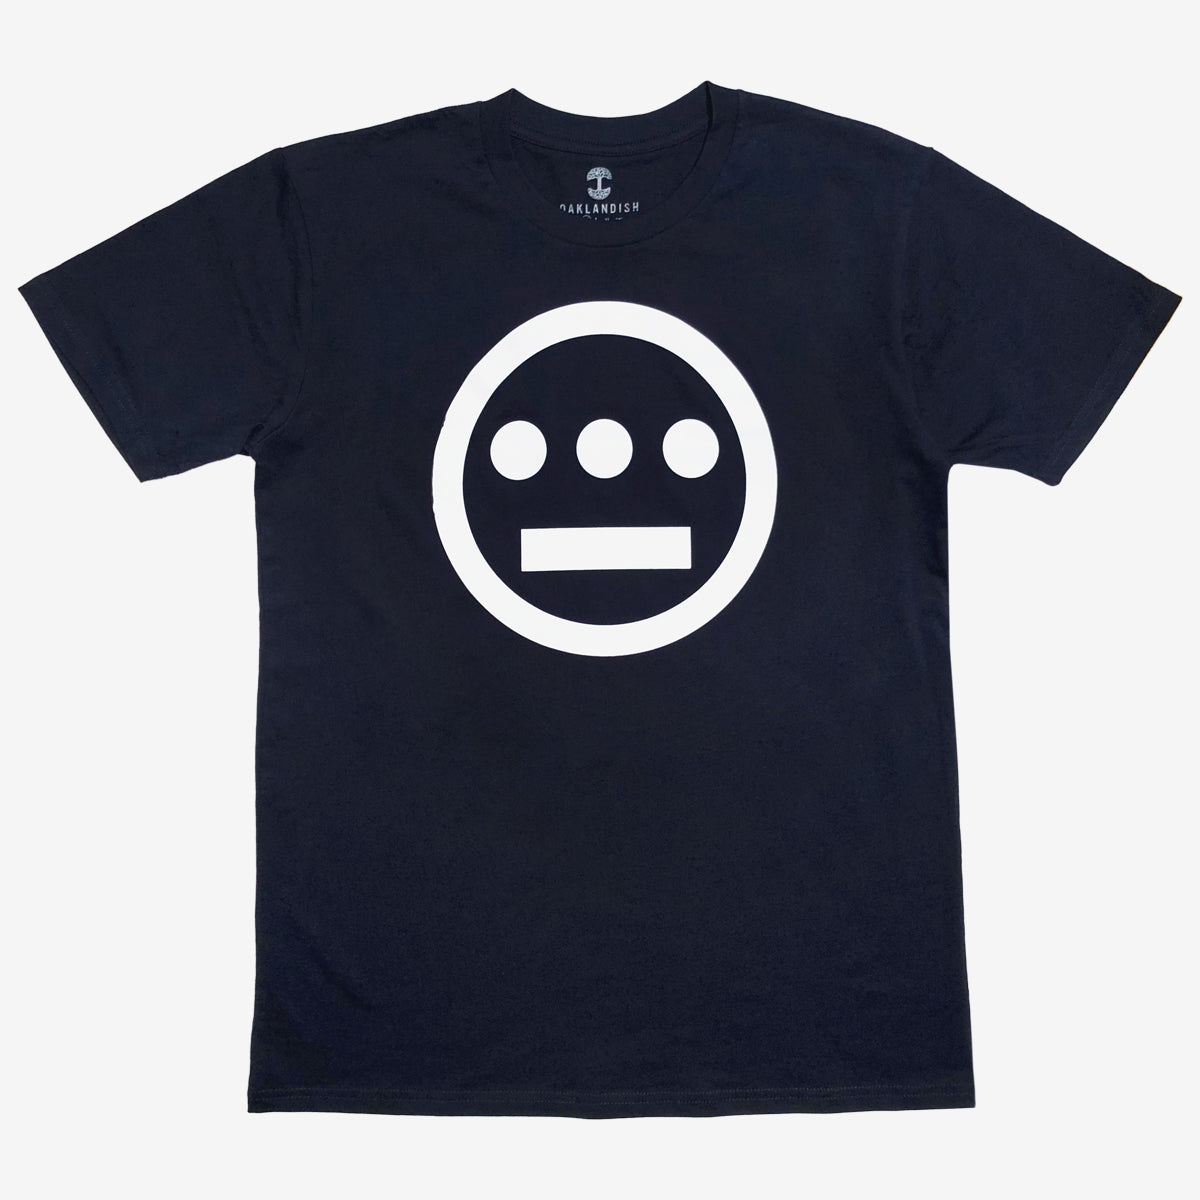 Navy t-shirt with white Hieroglyphics Hip-Hop logo on center chest. 